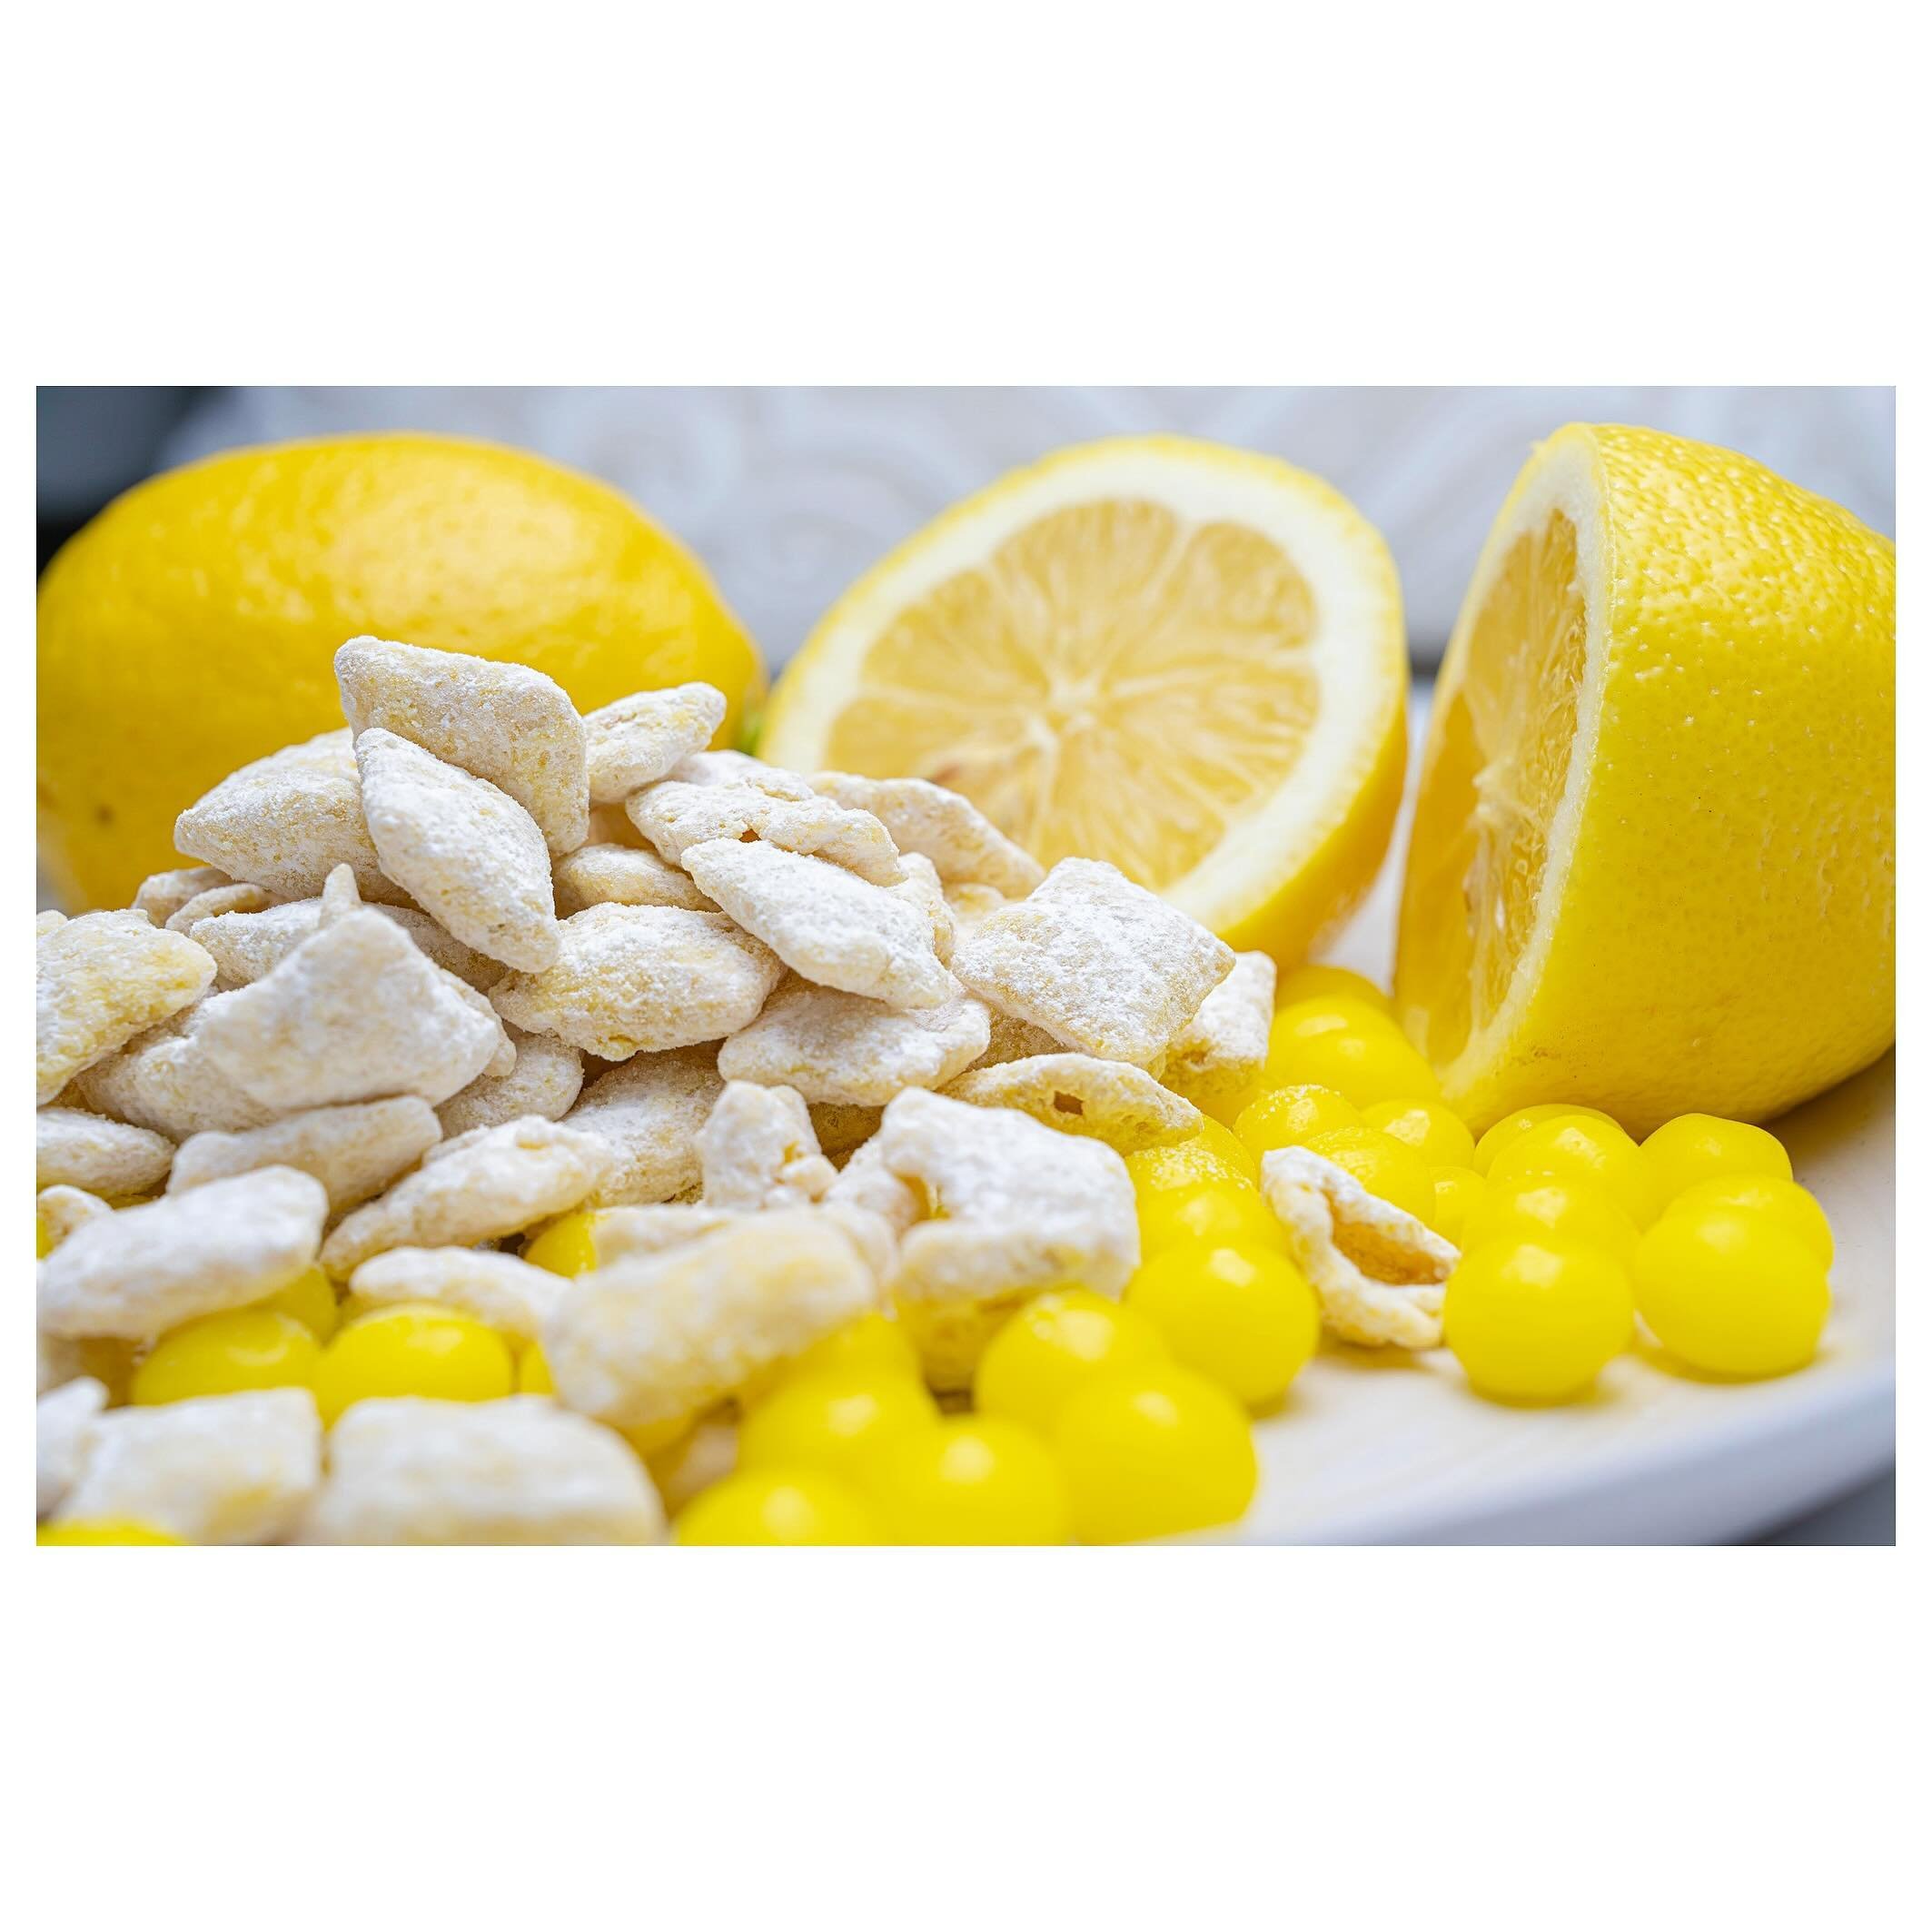 Indulge in a burst of tangy sweetness with our irresistible lemon Puppy Chow! 🍋✨ The perfect snack to satisfy your cravings and brighten your day!☀️🫶🏻
~~~
#lemon #flavoredpuppychow #katespoperella #sweets
#homebaker #snacktime #sweettreats #inthek